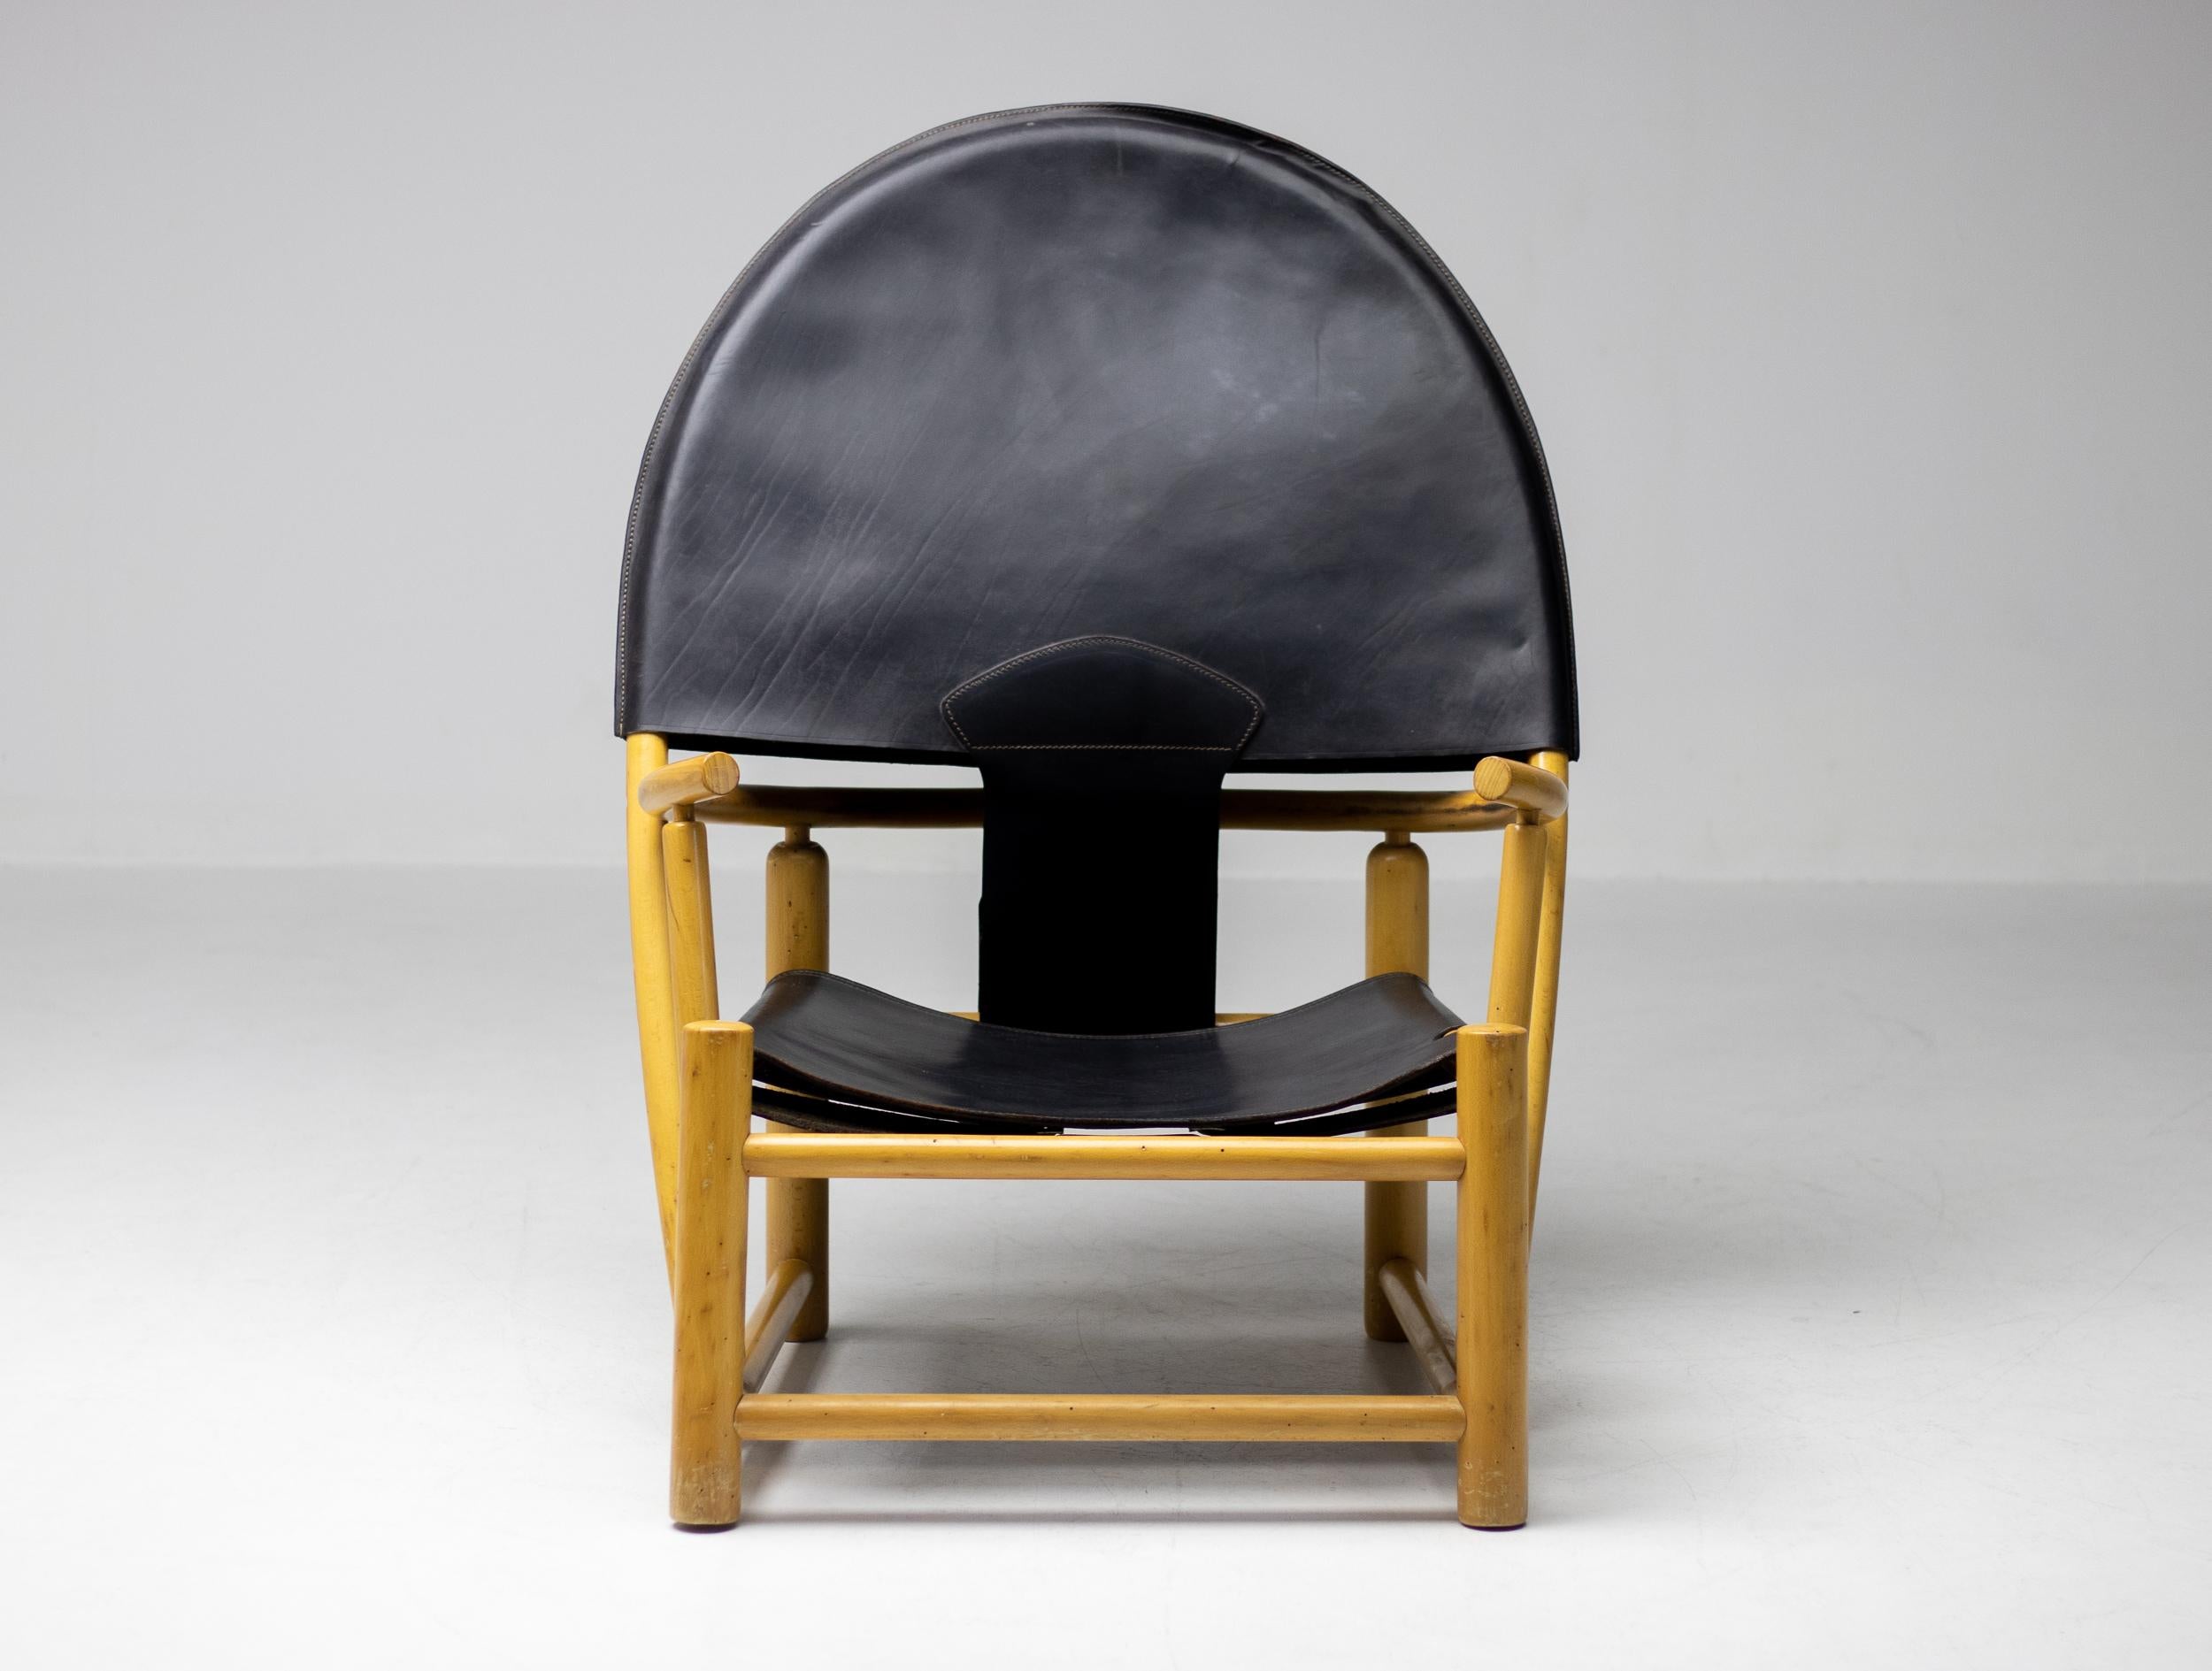 Oversized and huge on character and style this G23 Hoop chair design by Piero Palange and Werther Toffoloni for Germa, Italy is truly a masterpiece. An elegant curvacious solid maple frame combined with beautifully patinated black leather seat. 
The